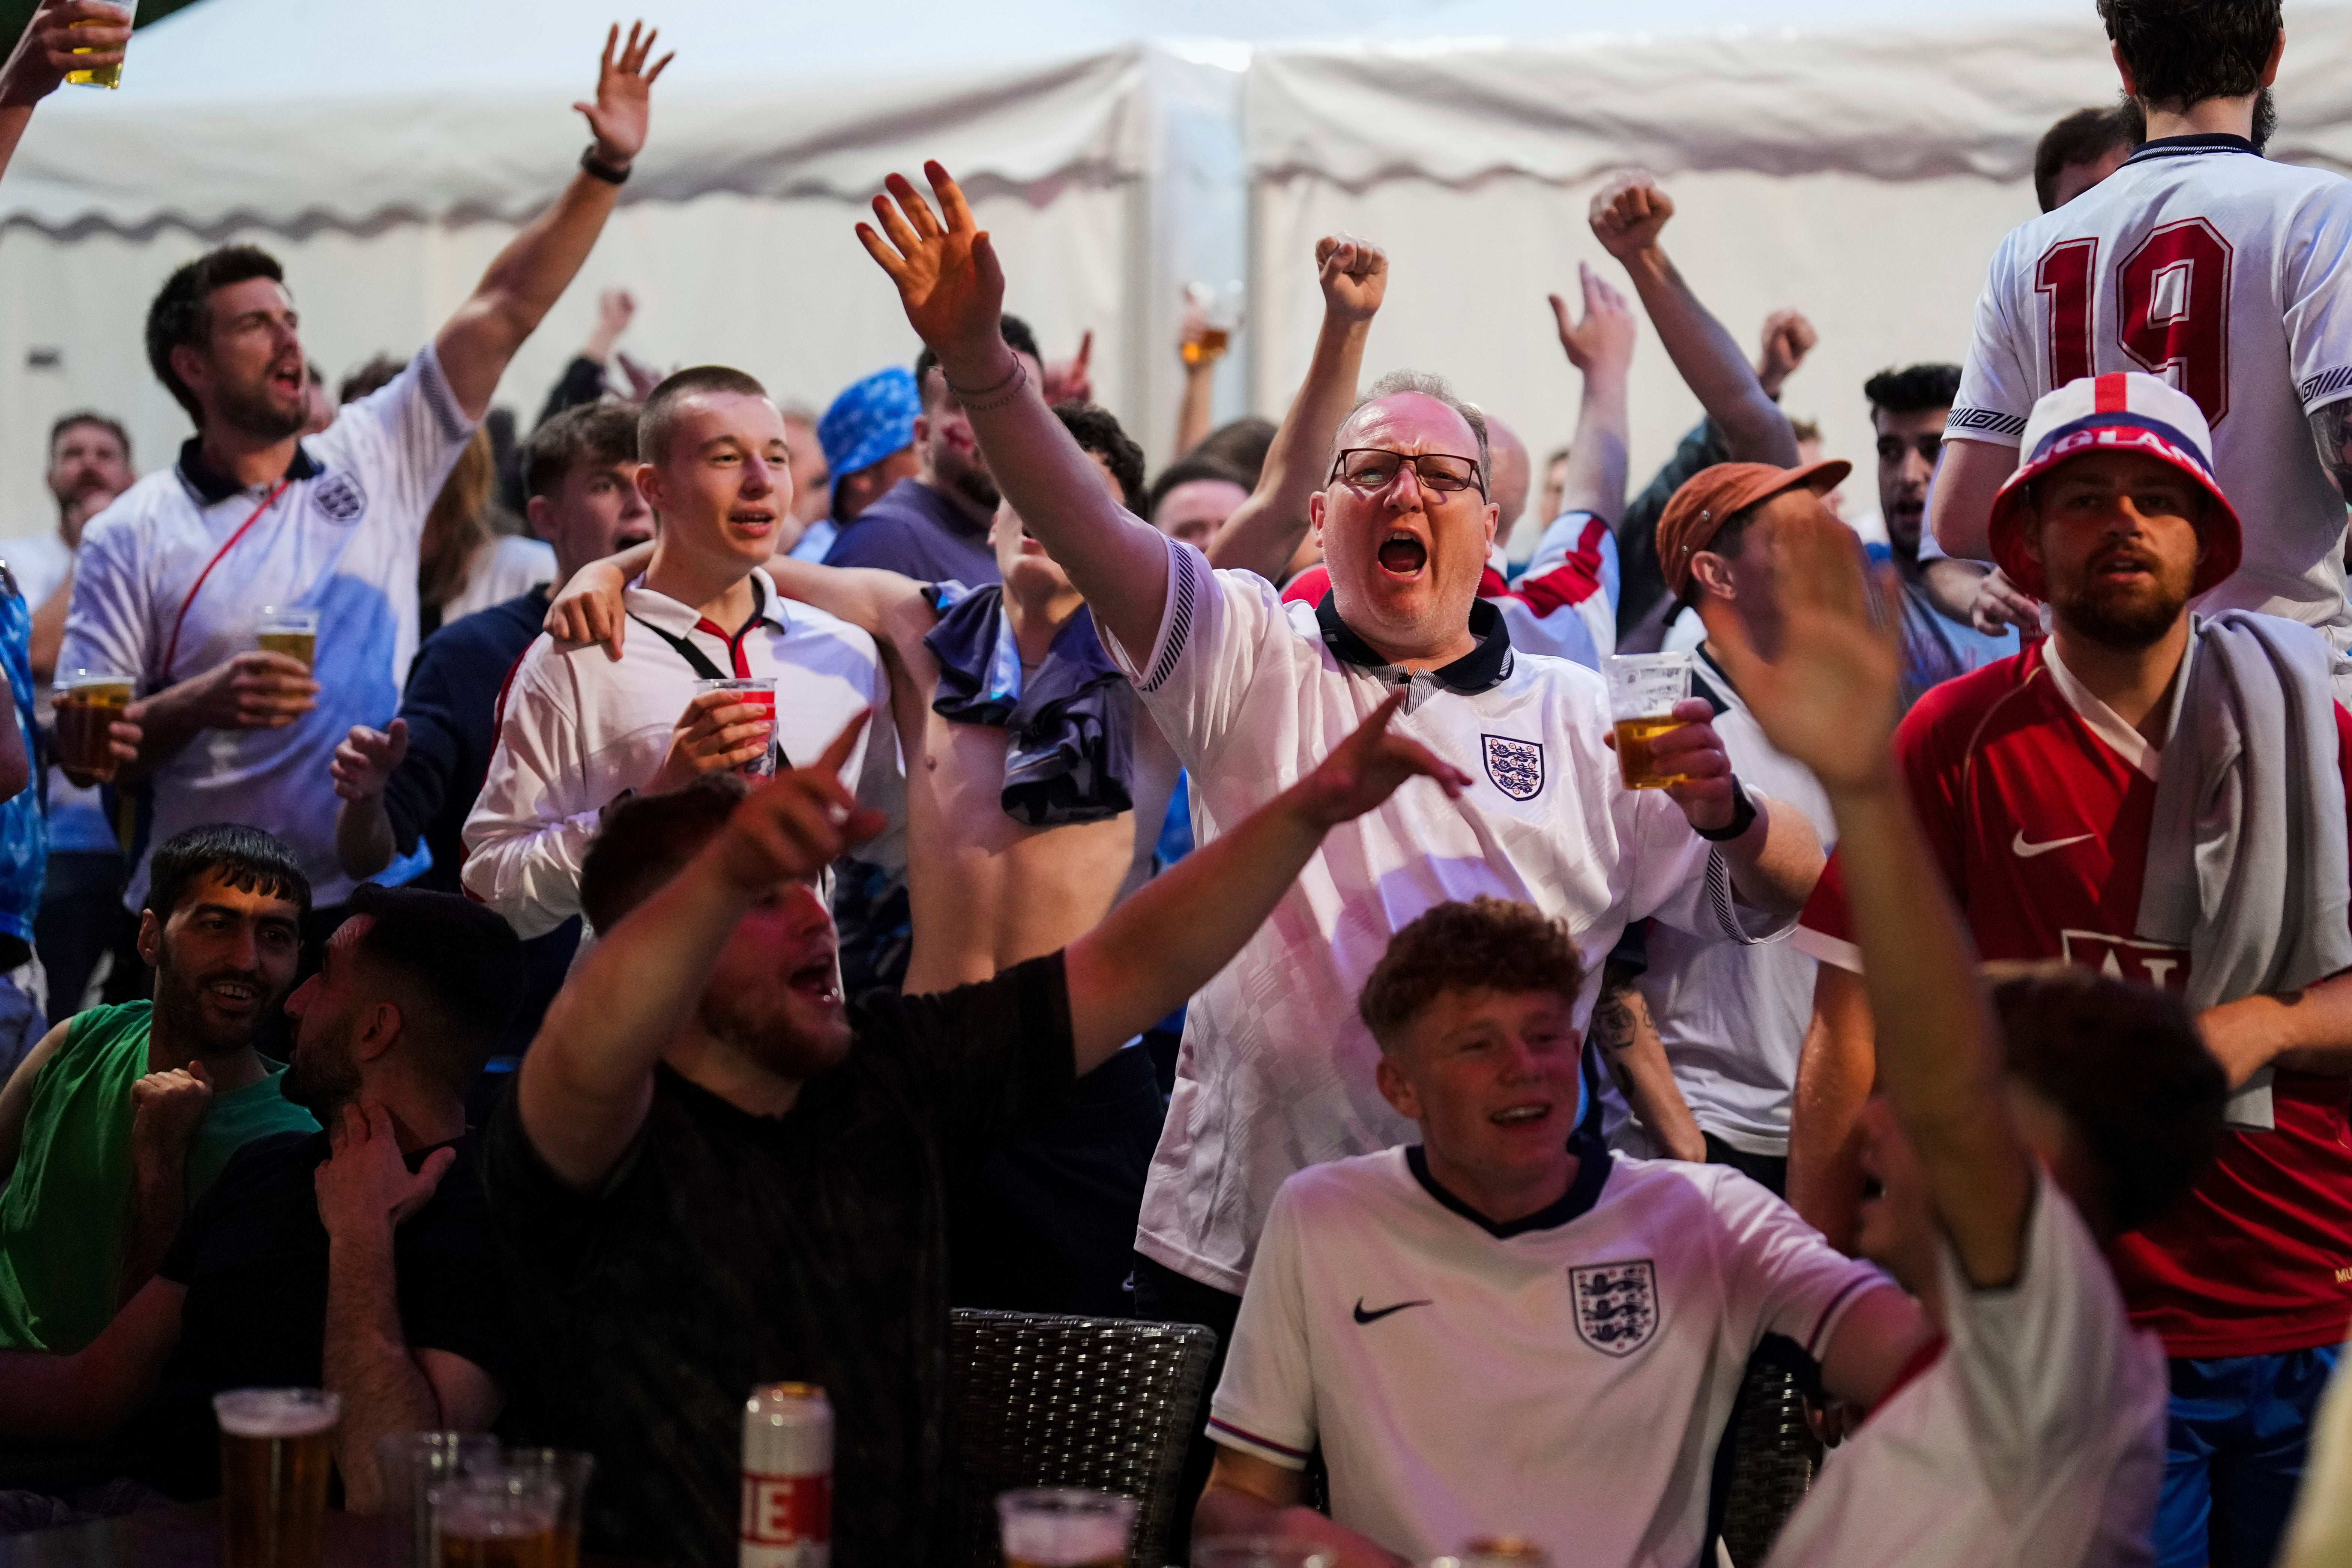 England fans have been on best behaviour in Germany